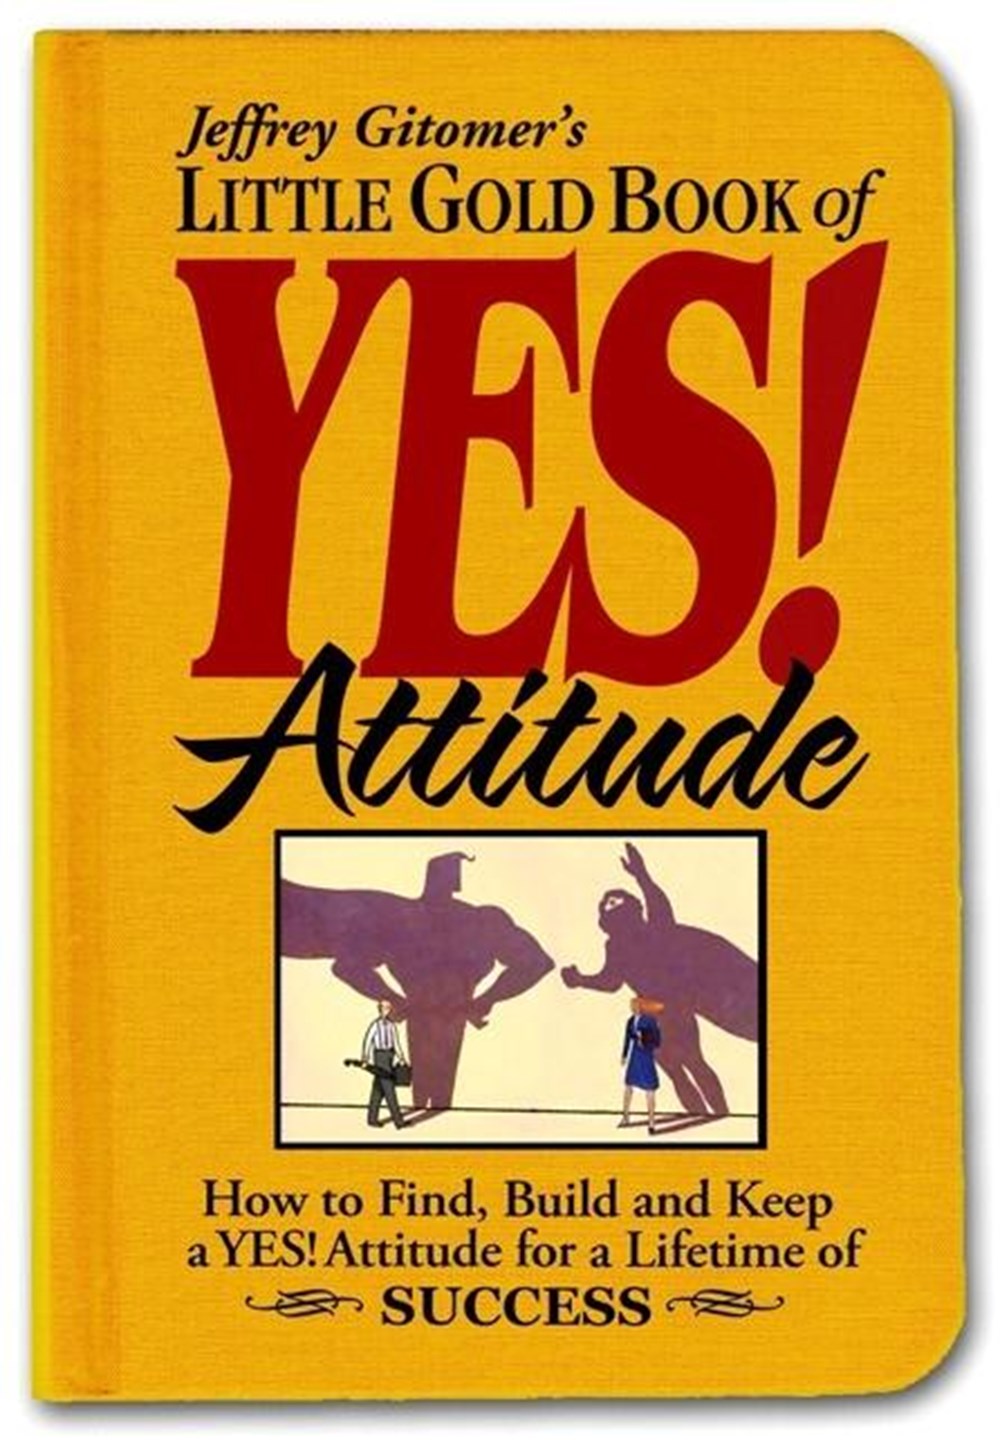 Little Gold Book of Yes! Attitude How to Find, Build and Keep a Yes! Attitude for a Lifetime of Succ